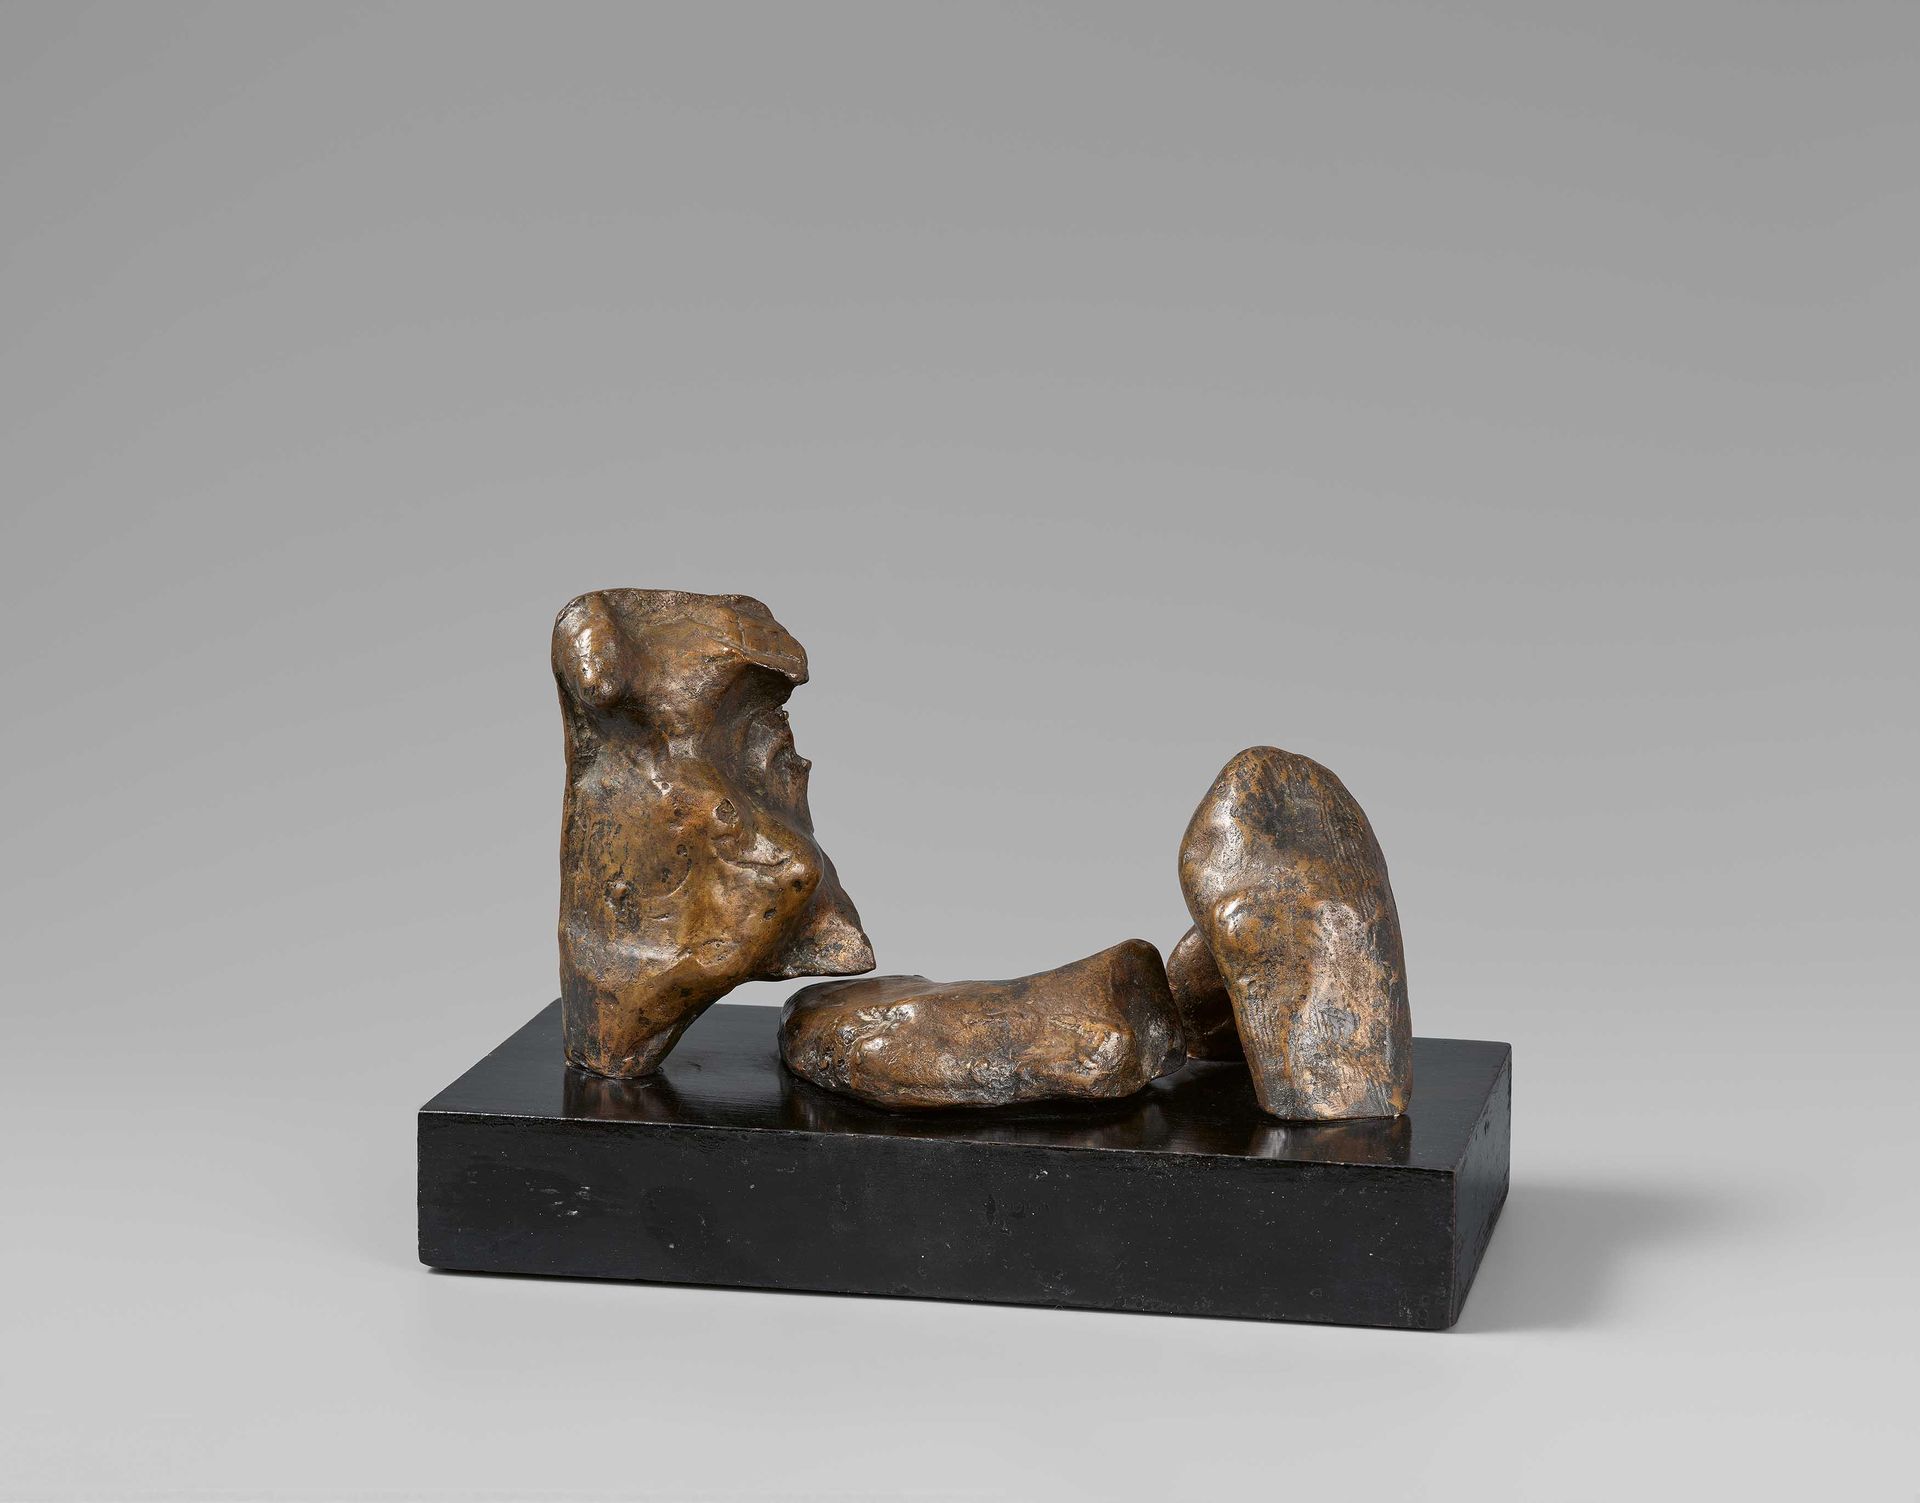 Henry Moore MOORE, HENRY
1898 Castleford/Yorkshire - 1986 Much Hadham

Titolo: F&hellip;